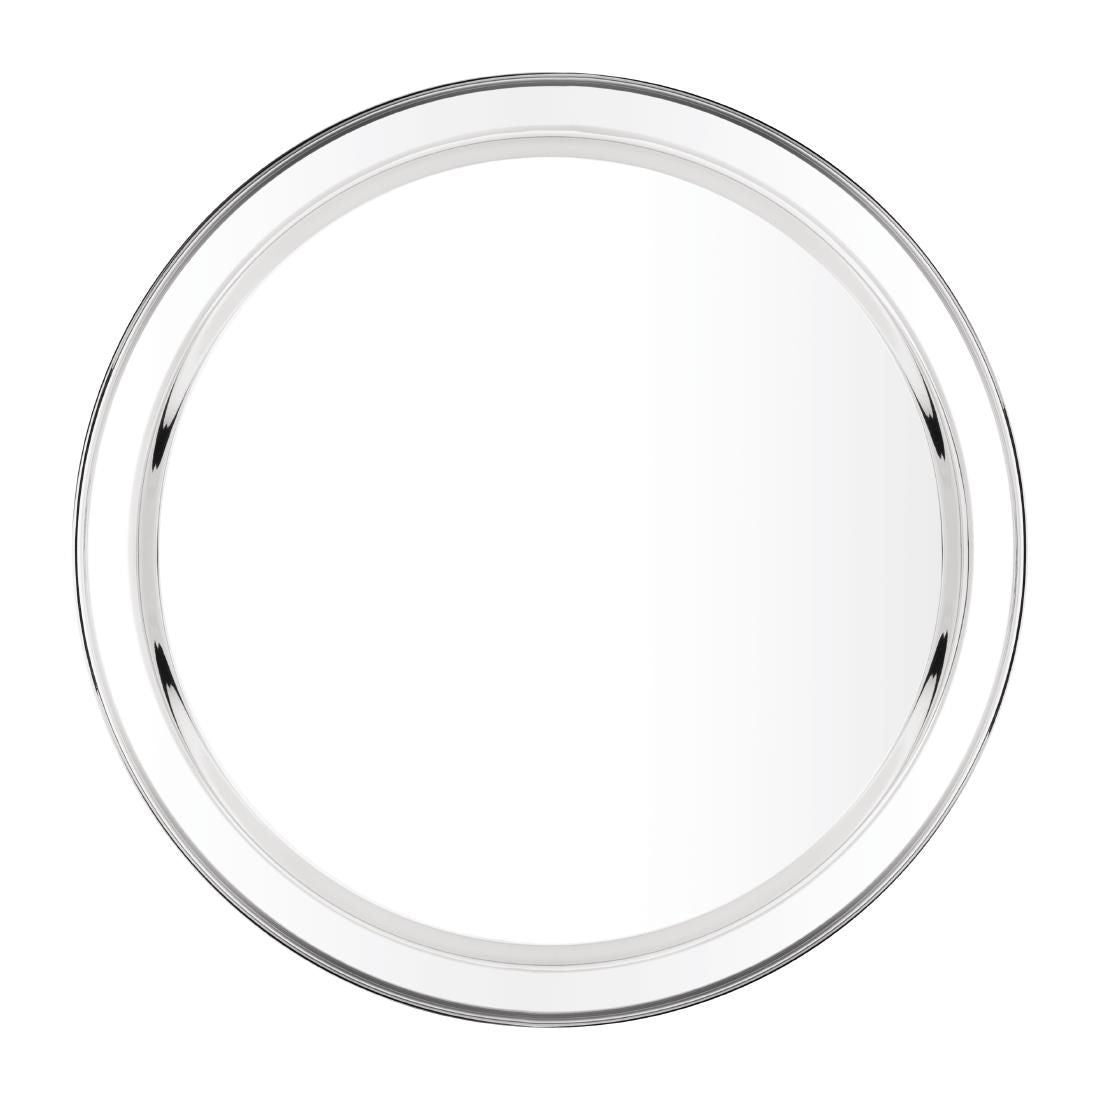 DM194 Olympia Stainless Steel Round Service Tray 405mm JD Catering Equipment Solutions Ltd